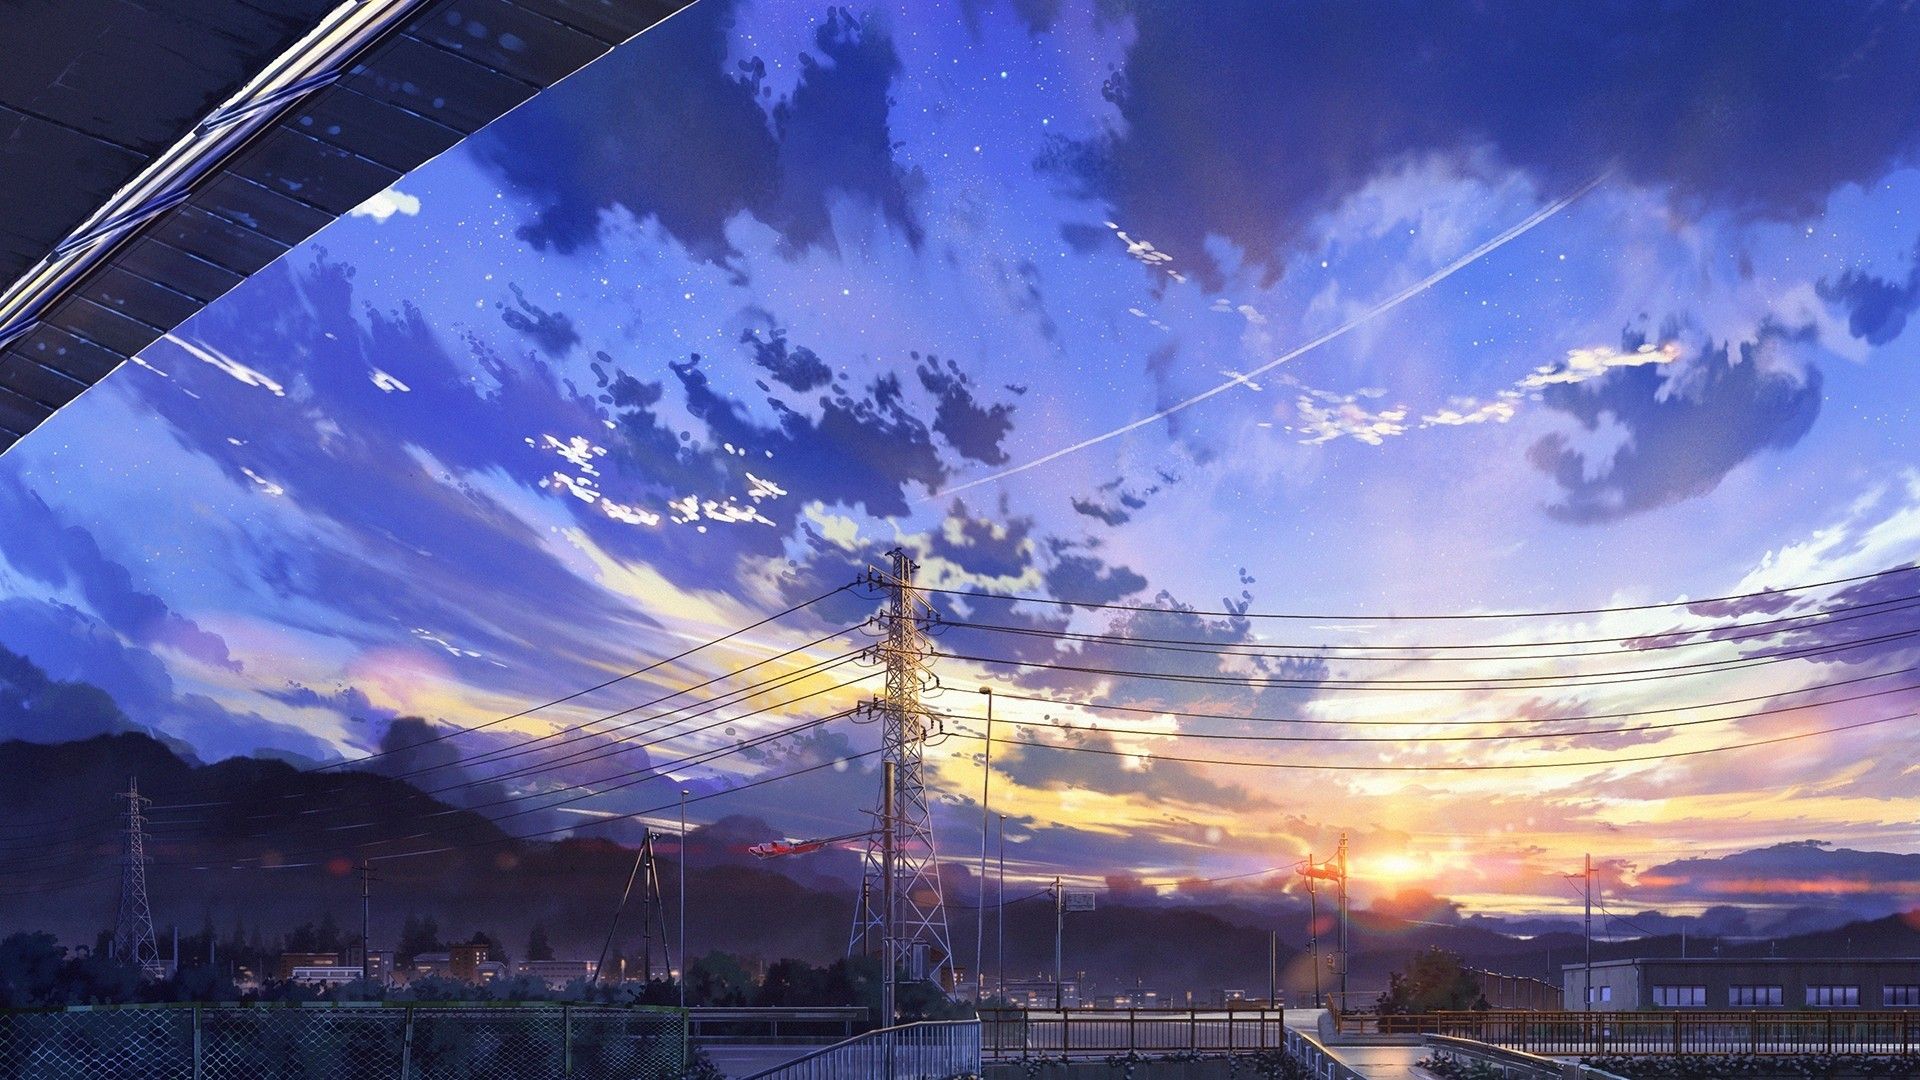 Download 1920x1080 Anime Landscape, Scenery, Clouds, Stars, Buildings Wallpaper for Widescreen